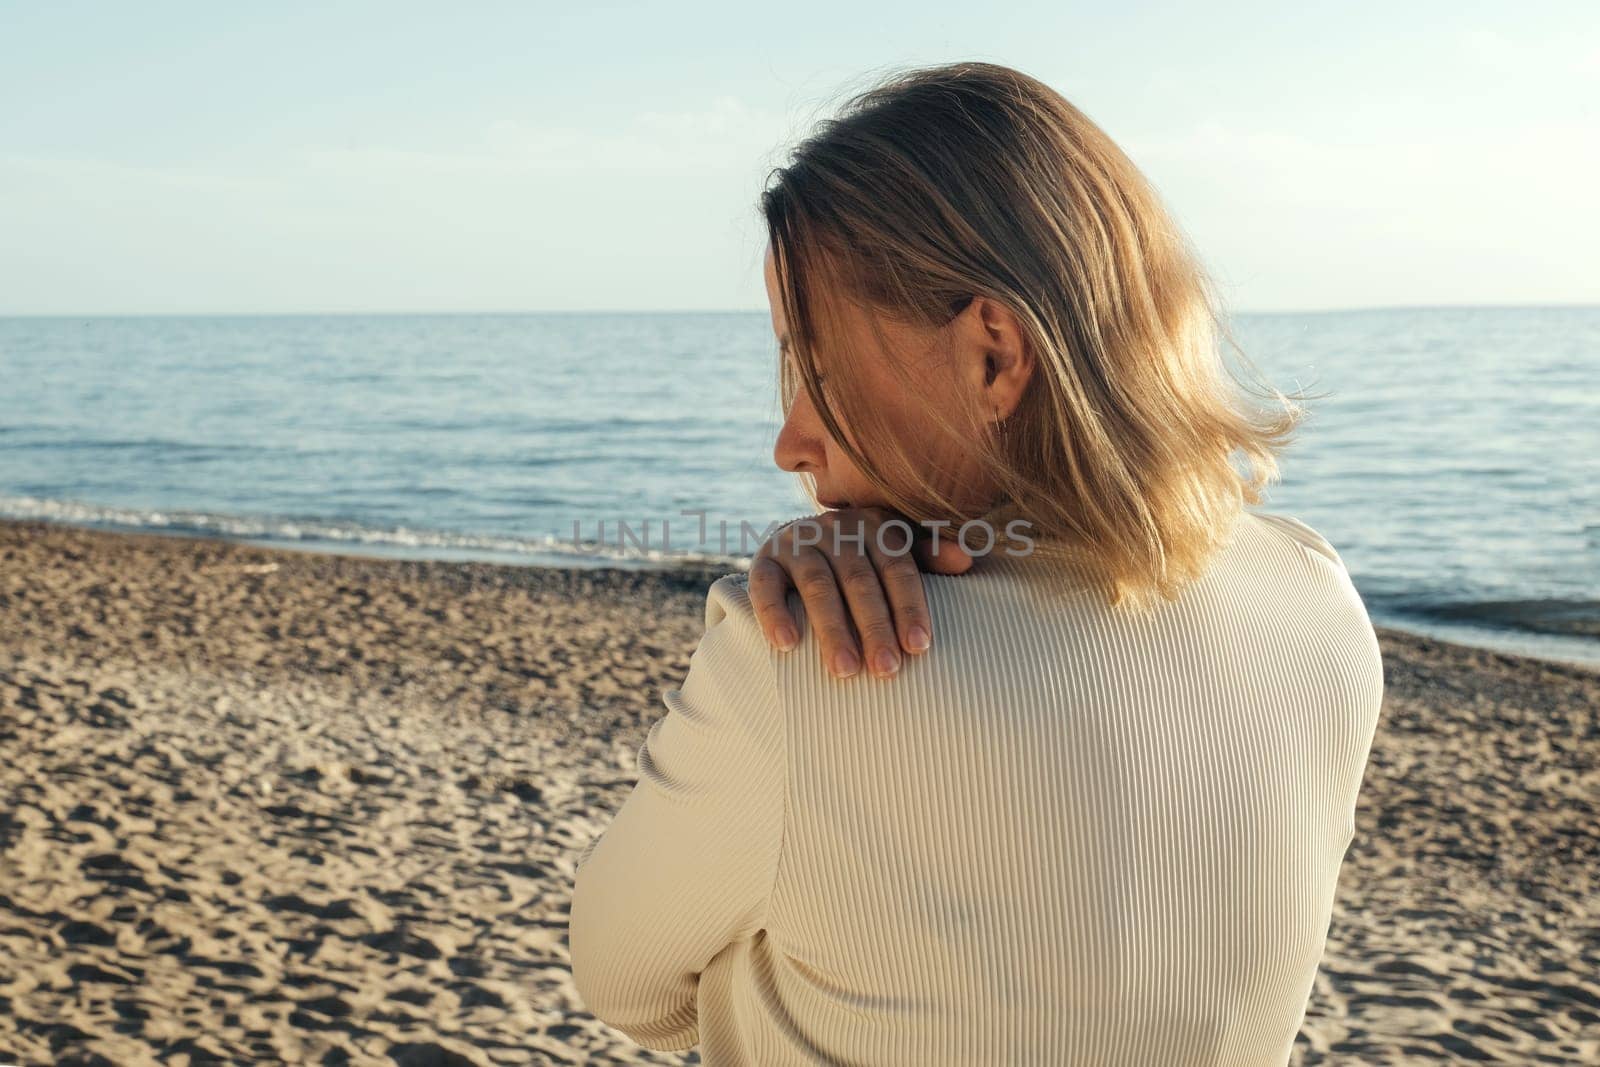 A woman standing on a sandy beach next to the ocean, looking out at the waves.